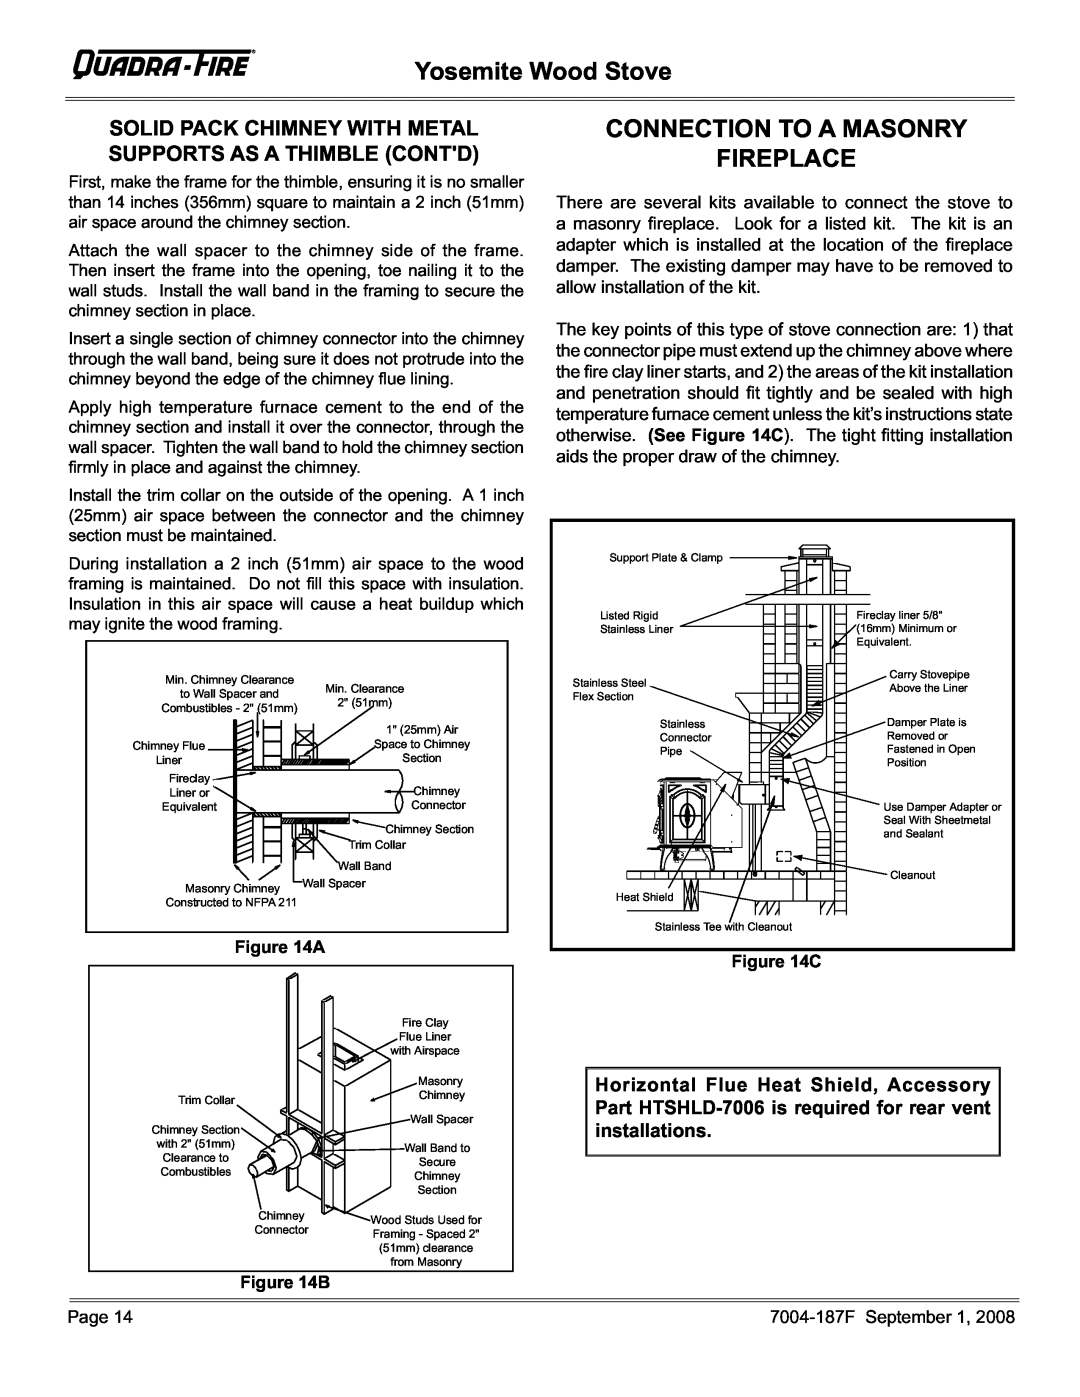 Hearth and Home Technologies PMH, MBK installation instructions Connection To A Masonry Fireplace, Yosemite Wood Stove 